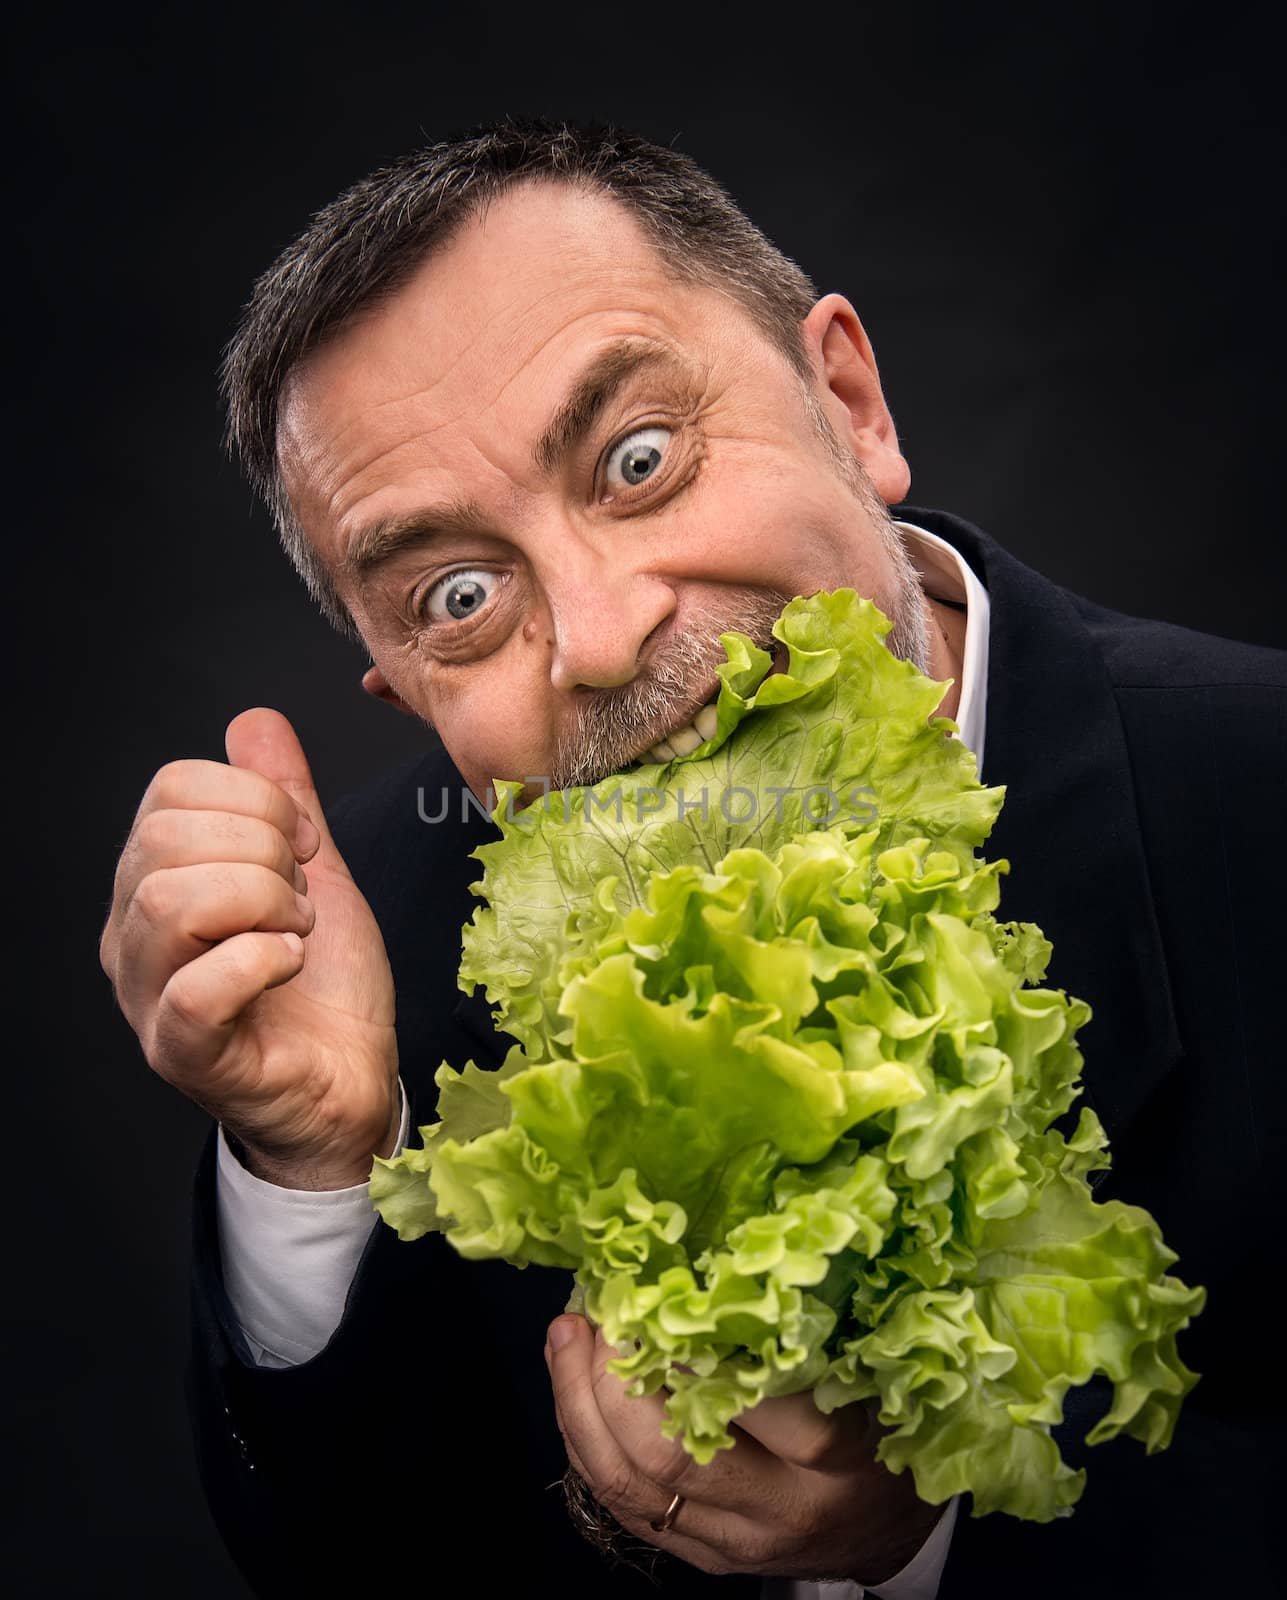 Healthy food. Man holding and eating lettuce